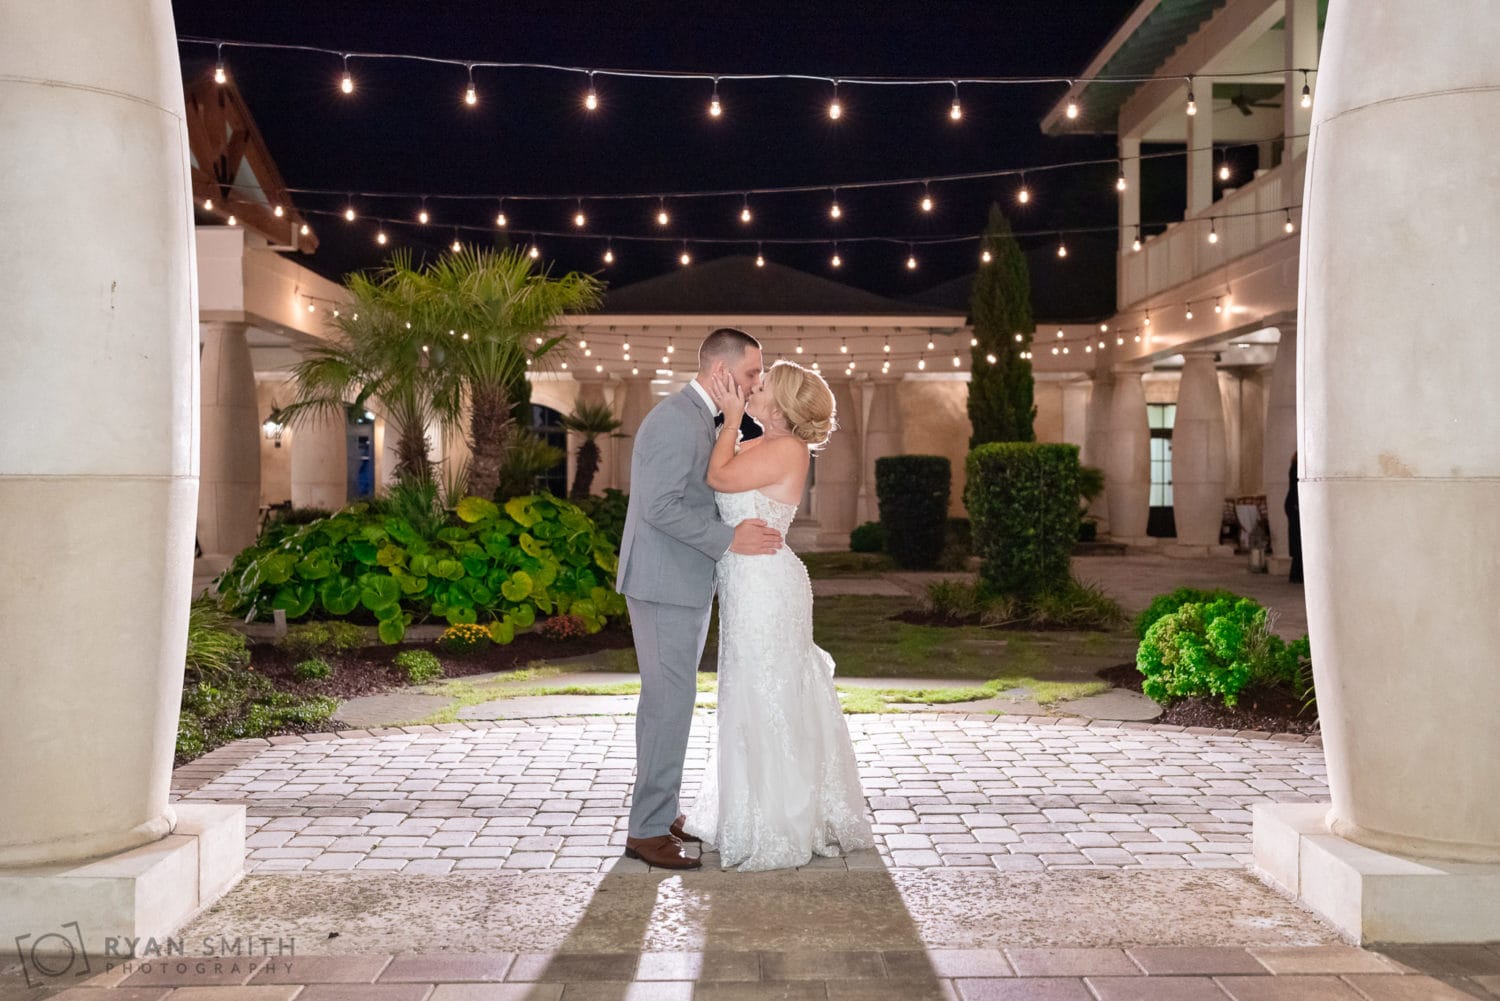 Bride and groom under the lights in the courtyard - 21 Main Events - North Myrtle Beach